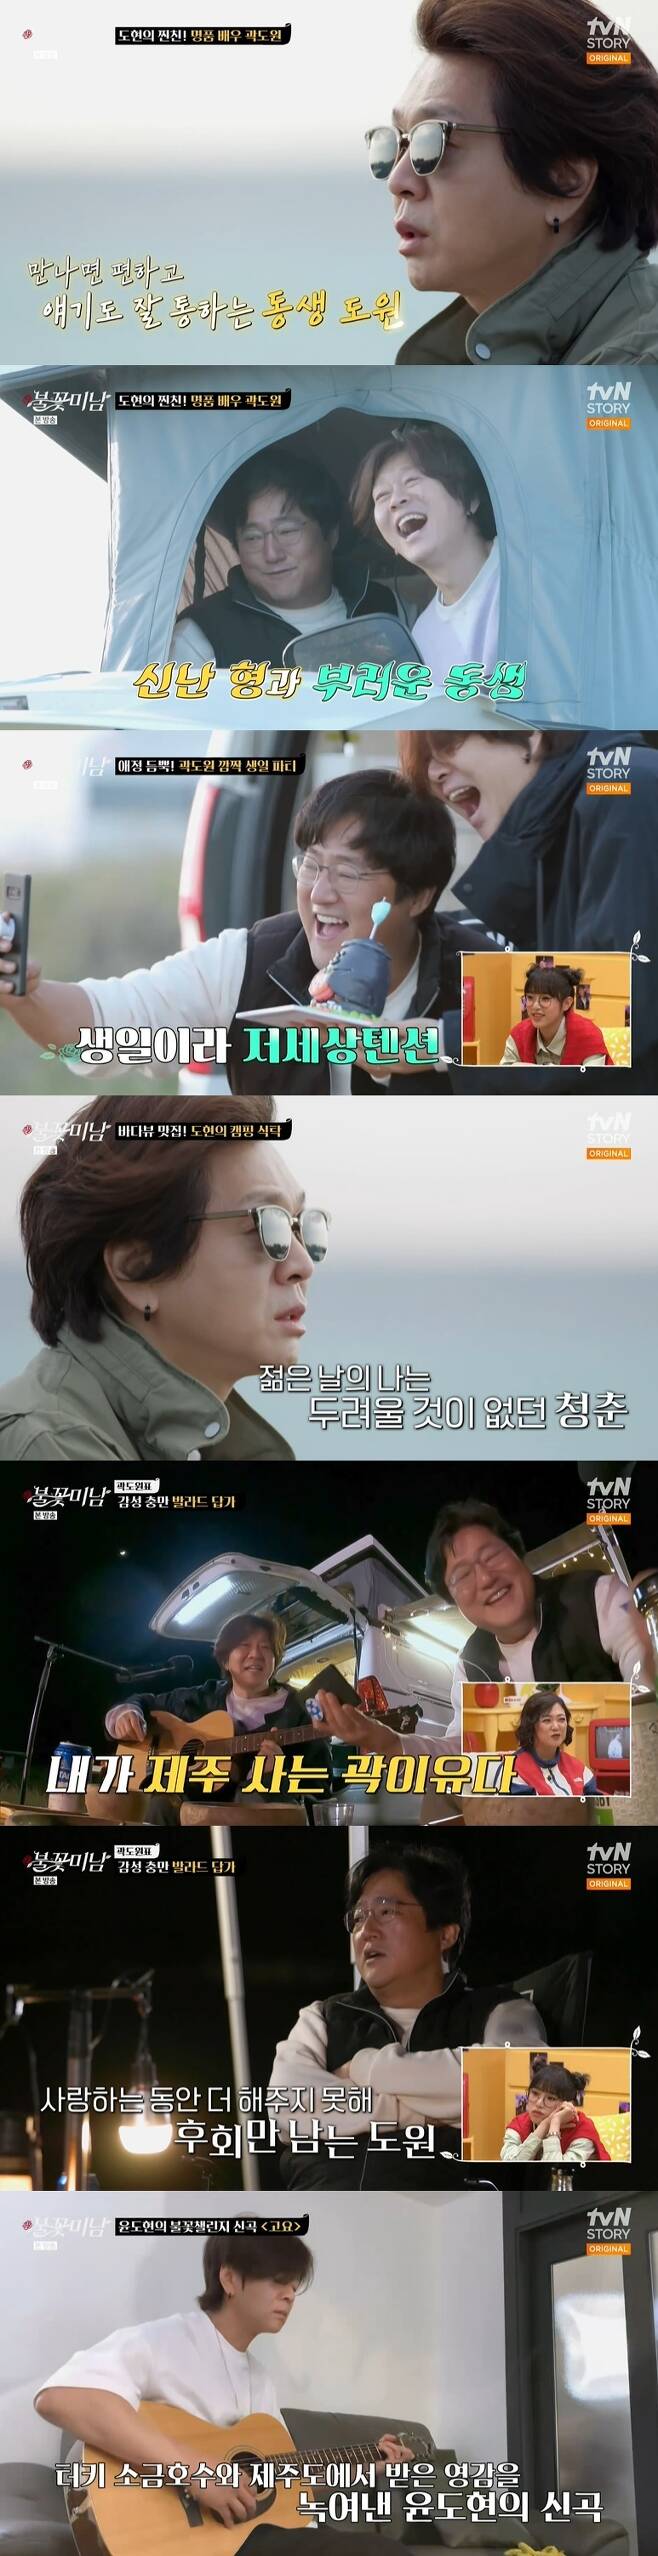 Cha In-pyo has built himself up for 100 days with a tireless passion, achieving his goal of being a Friend and magazine cover model in United States of America.On TVN STORY Fireworks Beautiful broadcast on June 24, the journey of the last three months for the filming of Bodie Profile of Cha In-pyo was released.Cha In-pyo introduced the story of Friend Kim Kwang-soo, who had a hard time with Corona 19 bursting as soon as he opened the health club last year and was infected to himself, and he joined the Muscle Magazine Cover Model, which Friend named Rob Reiner.Cha In-pyo, who had difficulty exercising to the neck disk, left cartilage injury and back disk, started to make bodywork for the past 100 days with rehabilitation.I did exercise for about 5 hours every day for 90 minutes of rehabilitation and muscle strength and 90 minutes of aerobics, and kept my diet thoroughly, including flour fasting.As a result, the weight was lost by 10kg and the body fat rate was lowered to 9.3%. Kim Kwang-soo also had a body fat rate of 8.6%, which is significantly lower than the average of 23 ~ 25% of 50s men.Lim Yoon-cha said that the top 0.1% of the 50s in Korea is the body of Cha In-pyo, saying, The back has improved like the god of the back.And I said I wanted to make an apple even if I did not have a coconut on my shoulder, but my brother followed me so well. As the filming began and Cha In-pyo took off the top, there was a lot of admiration among the field staff.Cha In-pyo boasted a starkly different change from 100 days ago after a bloody effort.Cha In-pyo was filmed in Korea, and Kim Kwang-soo was filmed at the same time as the United States of America shooting team, and immediately synthesized the photos as if the two were in one place.In the video call to Kim Kwang-soo, Cha In-pyo, who is a Rob Reiner, said, My 55-year-old spring day, which was able to pass plainly thanks to your proposal, became the time of Top Model filled with fairy tales.I am so grateful and proud that you are my friend who has dreamed the same dream as me and gave me positive energy.  I hope that our dreams that you and I take today will remain for a long time as another dream of I can do it if they can do it.Lets dream and top model, he said.Kim Kwang-soo eventually shed tears in Cha In-pyos letter. Cha In-pyo, who silently looked at Friend, said, Friend is a person who watches from the side silently.If there is one audience, Friend is like that, as the actor on stage finishes the play to the end. Lim Kochi said Cha In-pyo will not stop the Top Model and will prepare for the overseas muscle competition.Yoon Do Hyun, who started camping on a hill with a view of Jeju Islands Songak Mountain and sea scenery, invited his close brother Kwak Do-won.The Taoyuan is comfortable and the story works well when we meet, said Yoon Do Hyun, who expressed his affection for the honesty of the Taoyuan.Yoon Do Hyun introduced a camper with kitchen facilities, refrigerators and toiletries, and Kwak Do-won envied that I will only have fun music, and I can boast about it.Kwak Do-won was greatly moved when Yoon Do Hyun appeared with a cake for his birthday.Soon Do Hyon also served his own food and called I Love You at Kwak Do-wons request.When asked what he did best in his life, Yoon Do Hyun replied, If I did not do music, I would not have been able to live normally until now. I had a temperance because of music and I thought I should do my life well.Kwak Do-won revealed that the dog Mong-yi, who was close to dying of heartworms, pancreatitis, and murder tick infection, was a great comfort just to be next to him when he had a hard time.Yoon Do Hyun enthusiastically sang In front of the autumn post office and I will forget for Kwak Do-won, and Kwak Do-won and Yoon Do Hyun shared friendship with each other revealing respect for the job of actor and singer.Kwak Do-won enthused Jias Have a drink at the request of the song.Kwak Do-won, who sang in the heart of the main character in the song, recalled his old love, saying, It is like the word love that makes me wriggle.When asked what the mind of someone who comes to mind was, Kwak Do-won said, I am sorry and painful.Im sorry that the stupid, selfish, greedy guy didnt do it at the time because there were so many things I couldnt give out because of his selfish mind, he said.